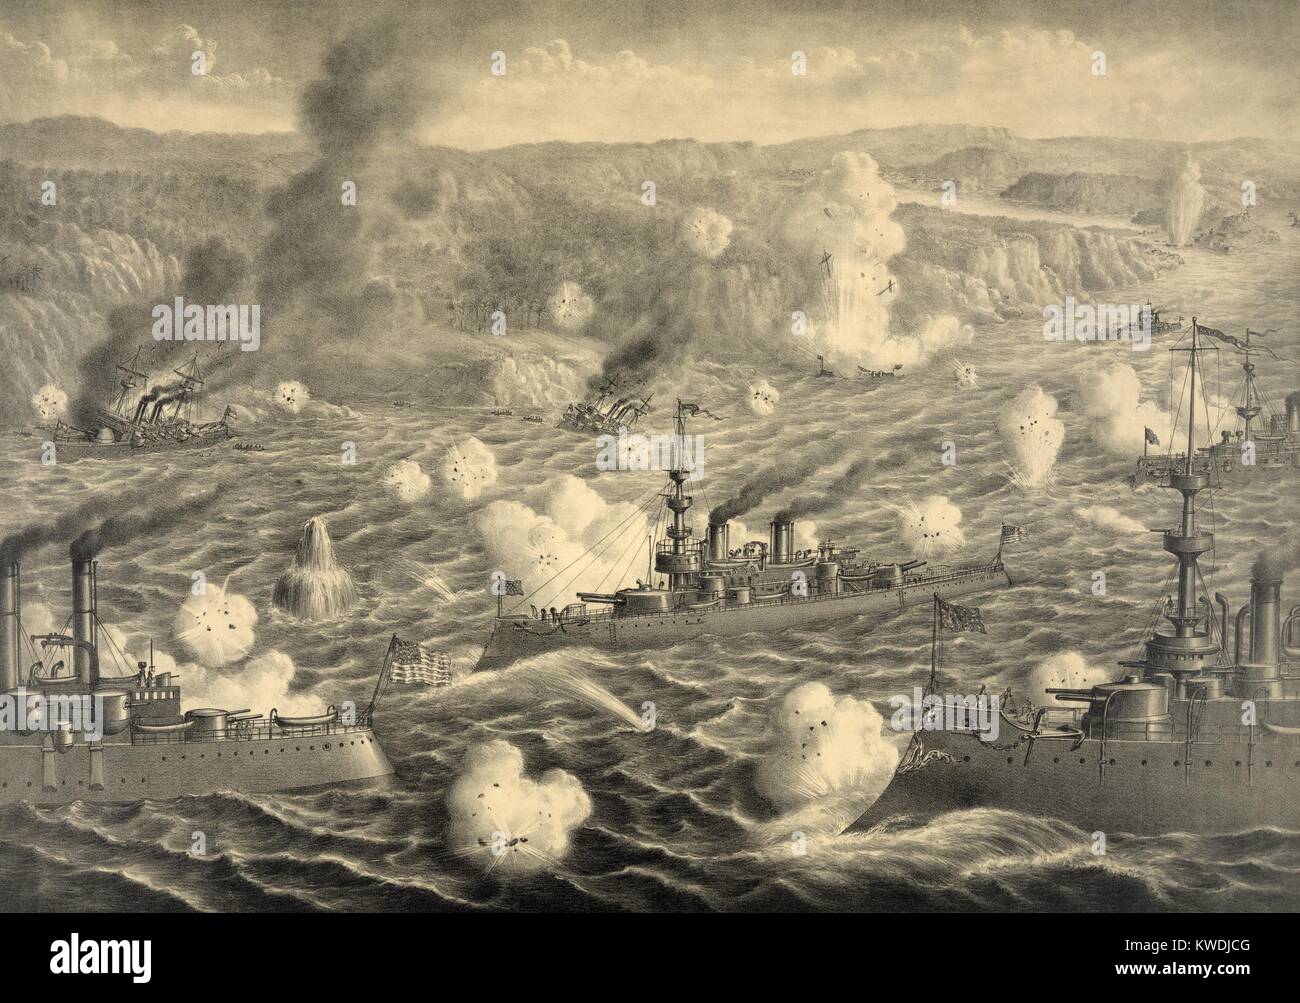 Destruction of Spanish fleet after it left Santiago Bay on July 3, 1898. Faced with capture or destruction when the US occupied the city of Santiago, they risked battle with the blockading US Squadron. The Spanish lost all their ships, suffering 350 dead, and 160 wounded (BSLOC 2017 10 48) Stock Photo